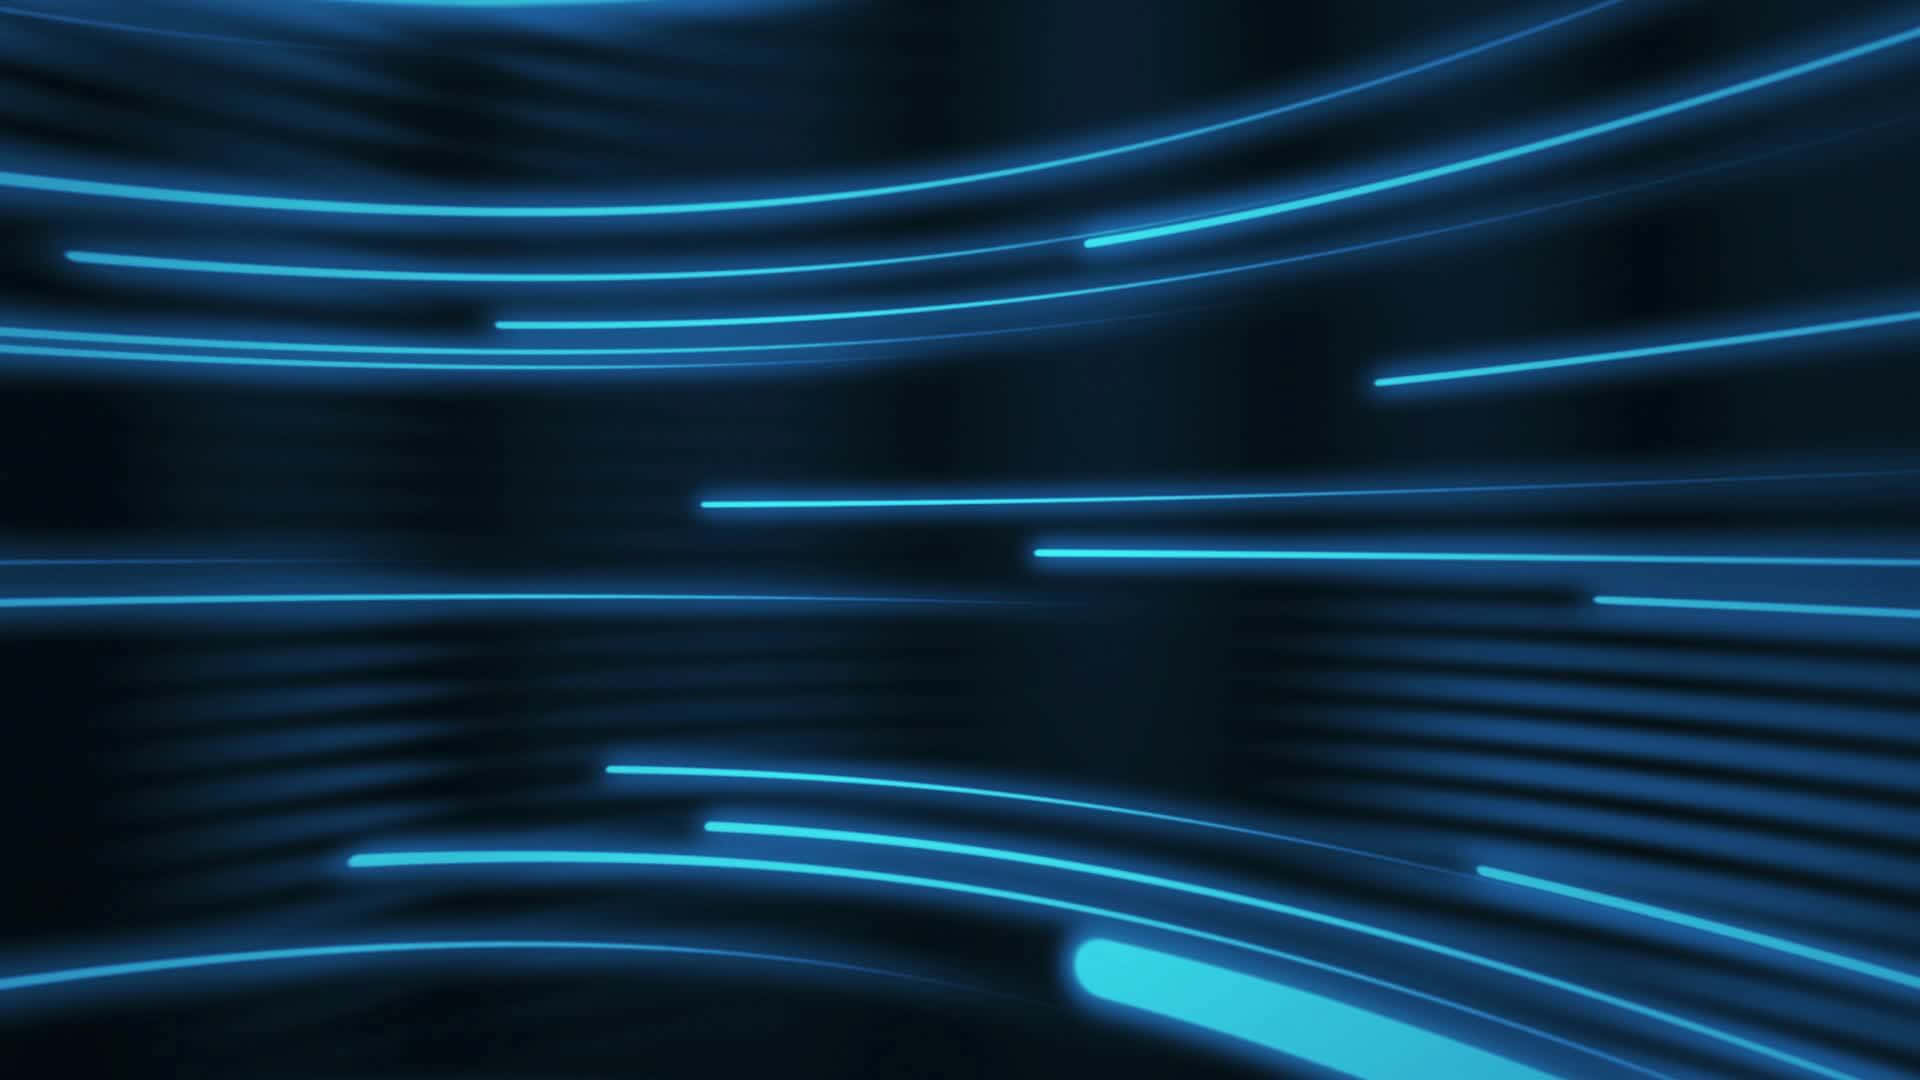 Image  “Neon Blue Abstract Background”